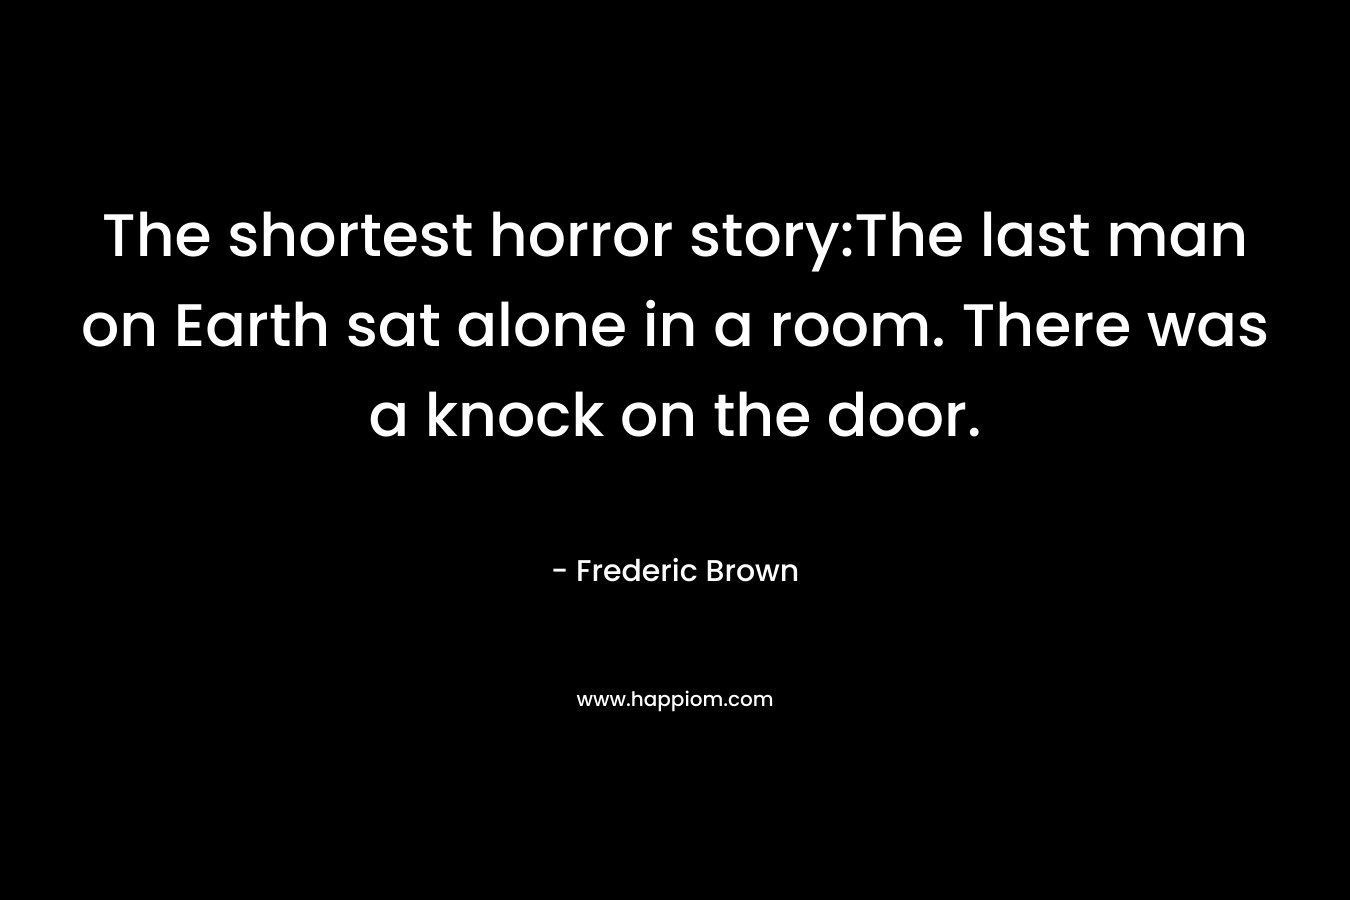 The shortest horror story:The last man on Earth sat alone in a room. There was a knock on the door.